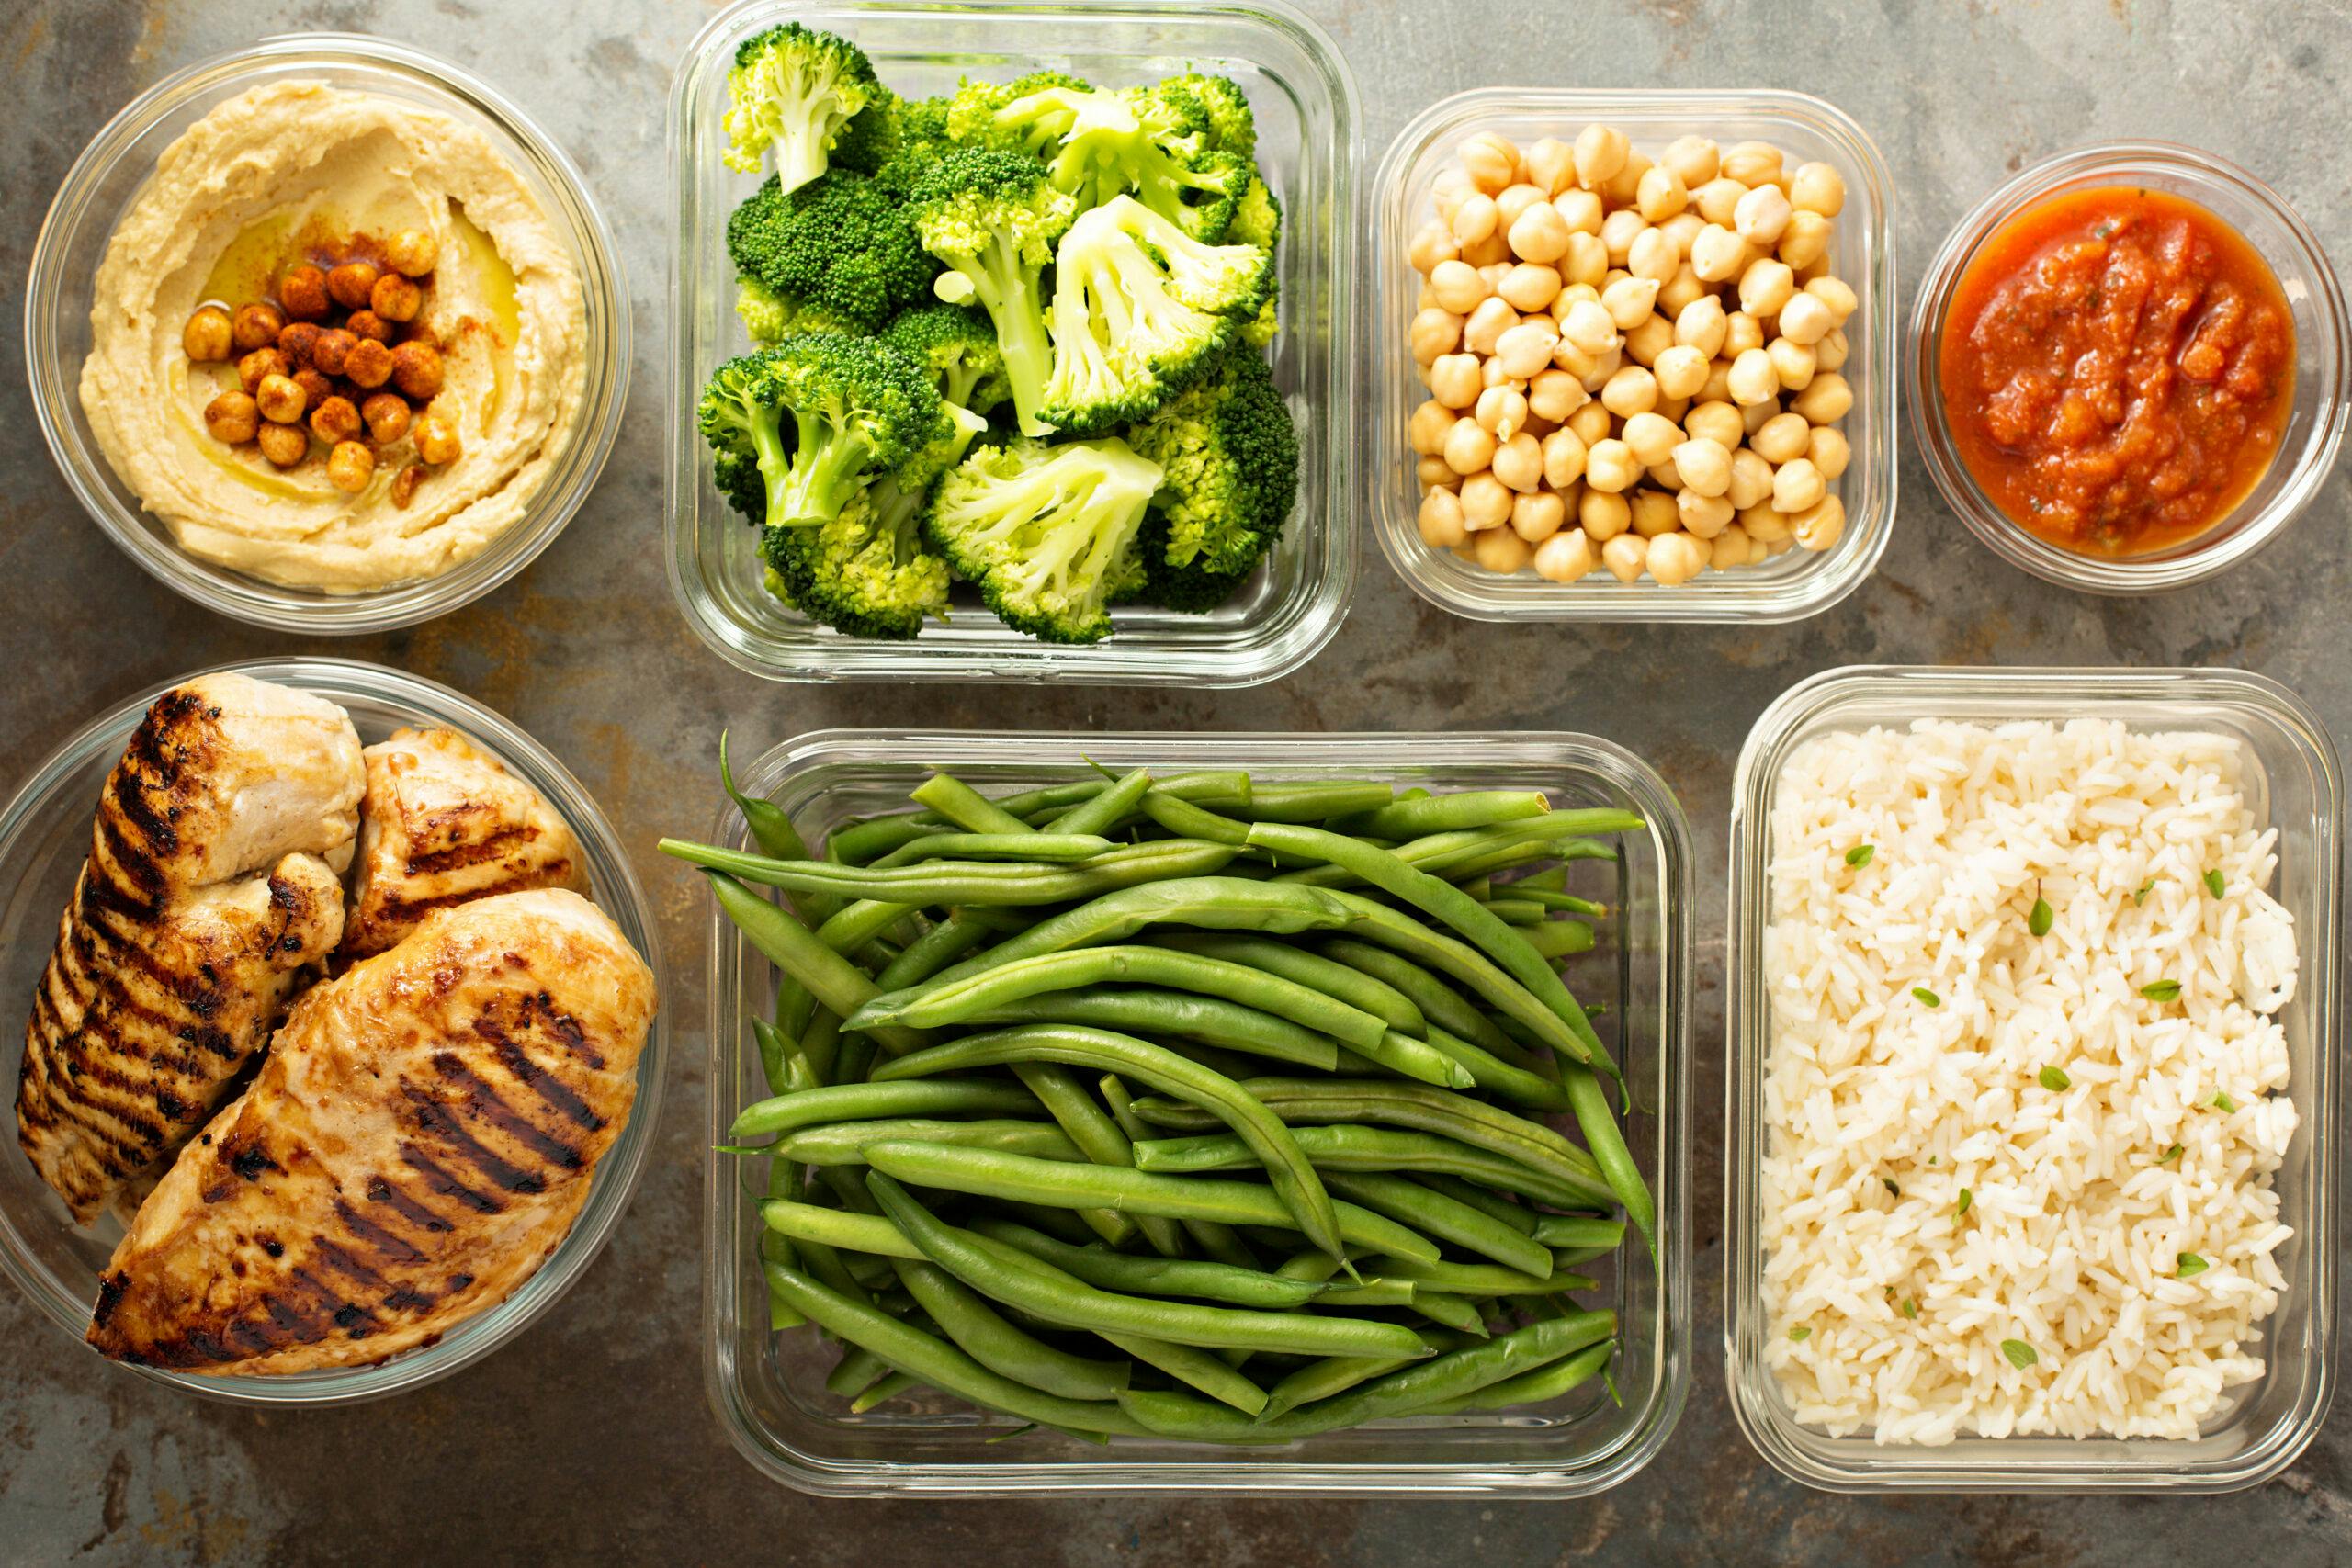 Building Lean Muscle Mass and Meals to Sustain It